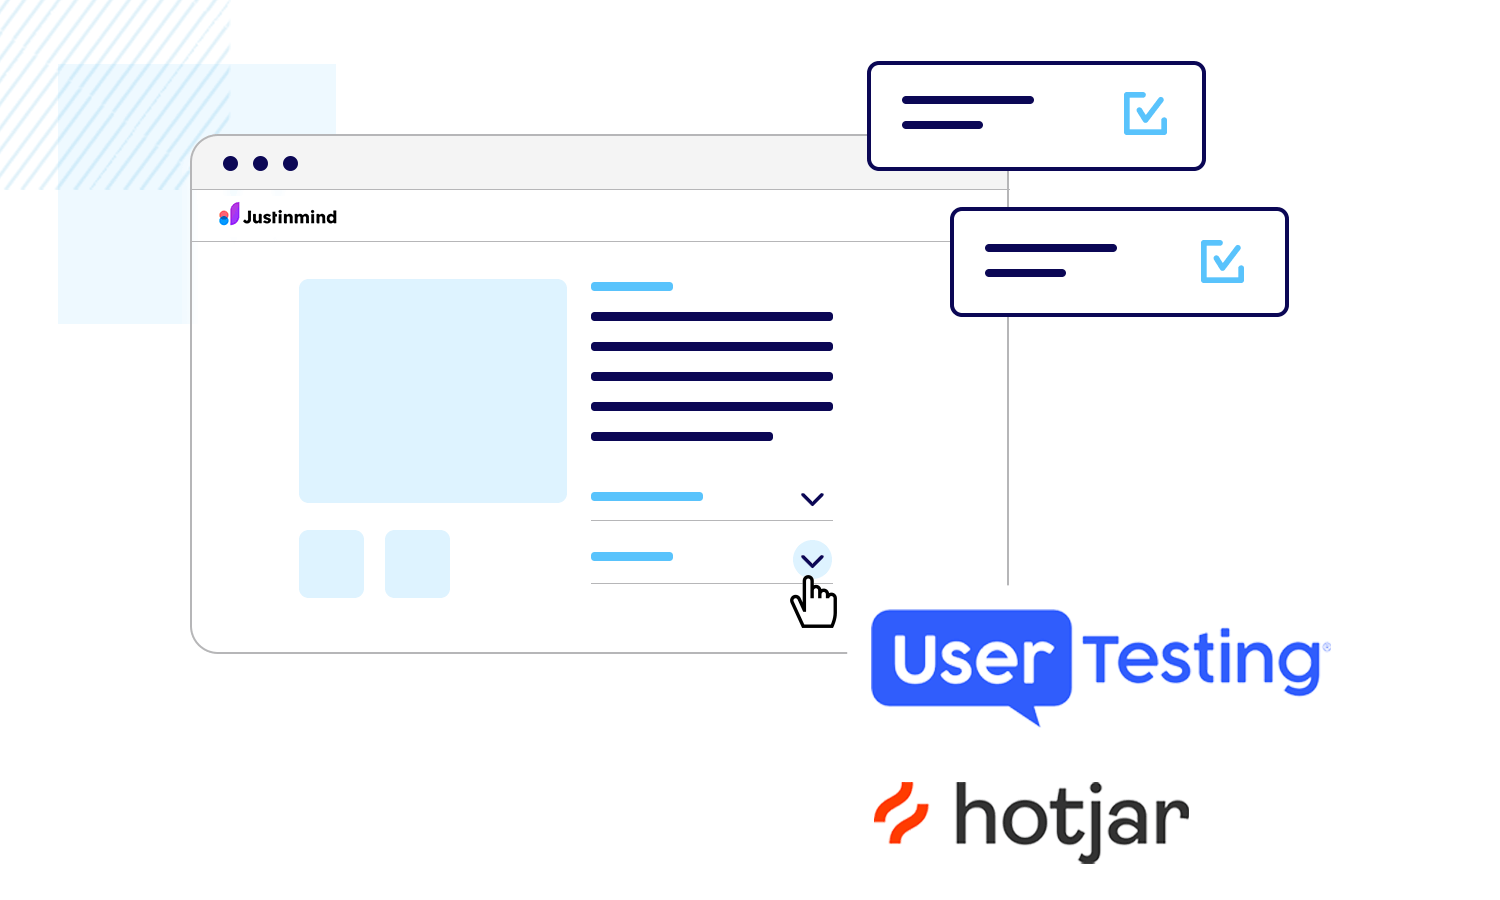 Interface of Justinmind tool showcasing user testing features with UserTesting and Hotjar integration.